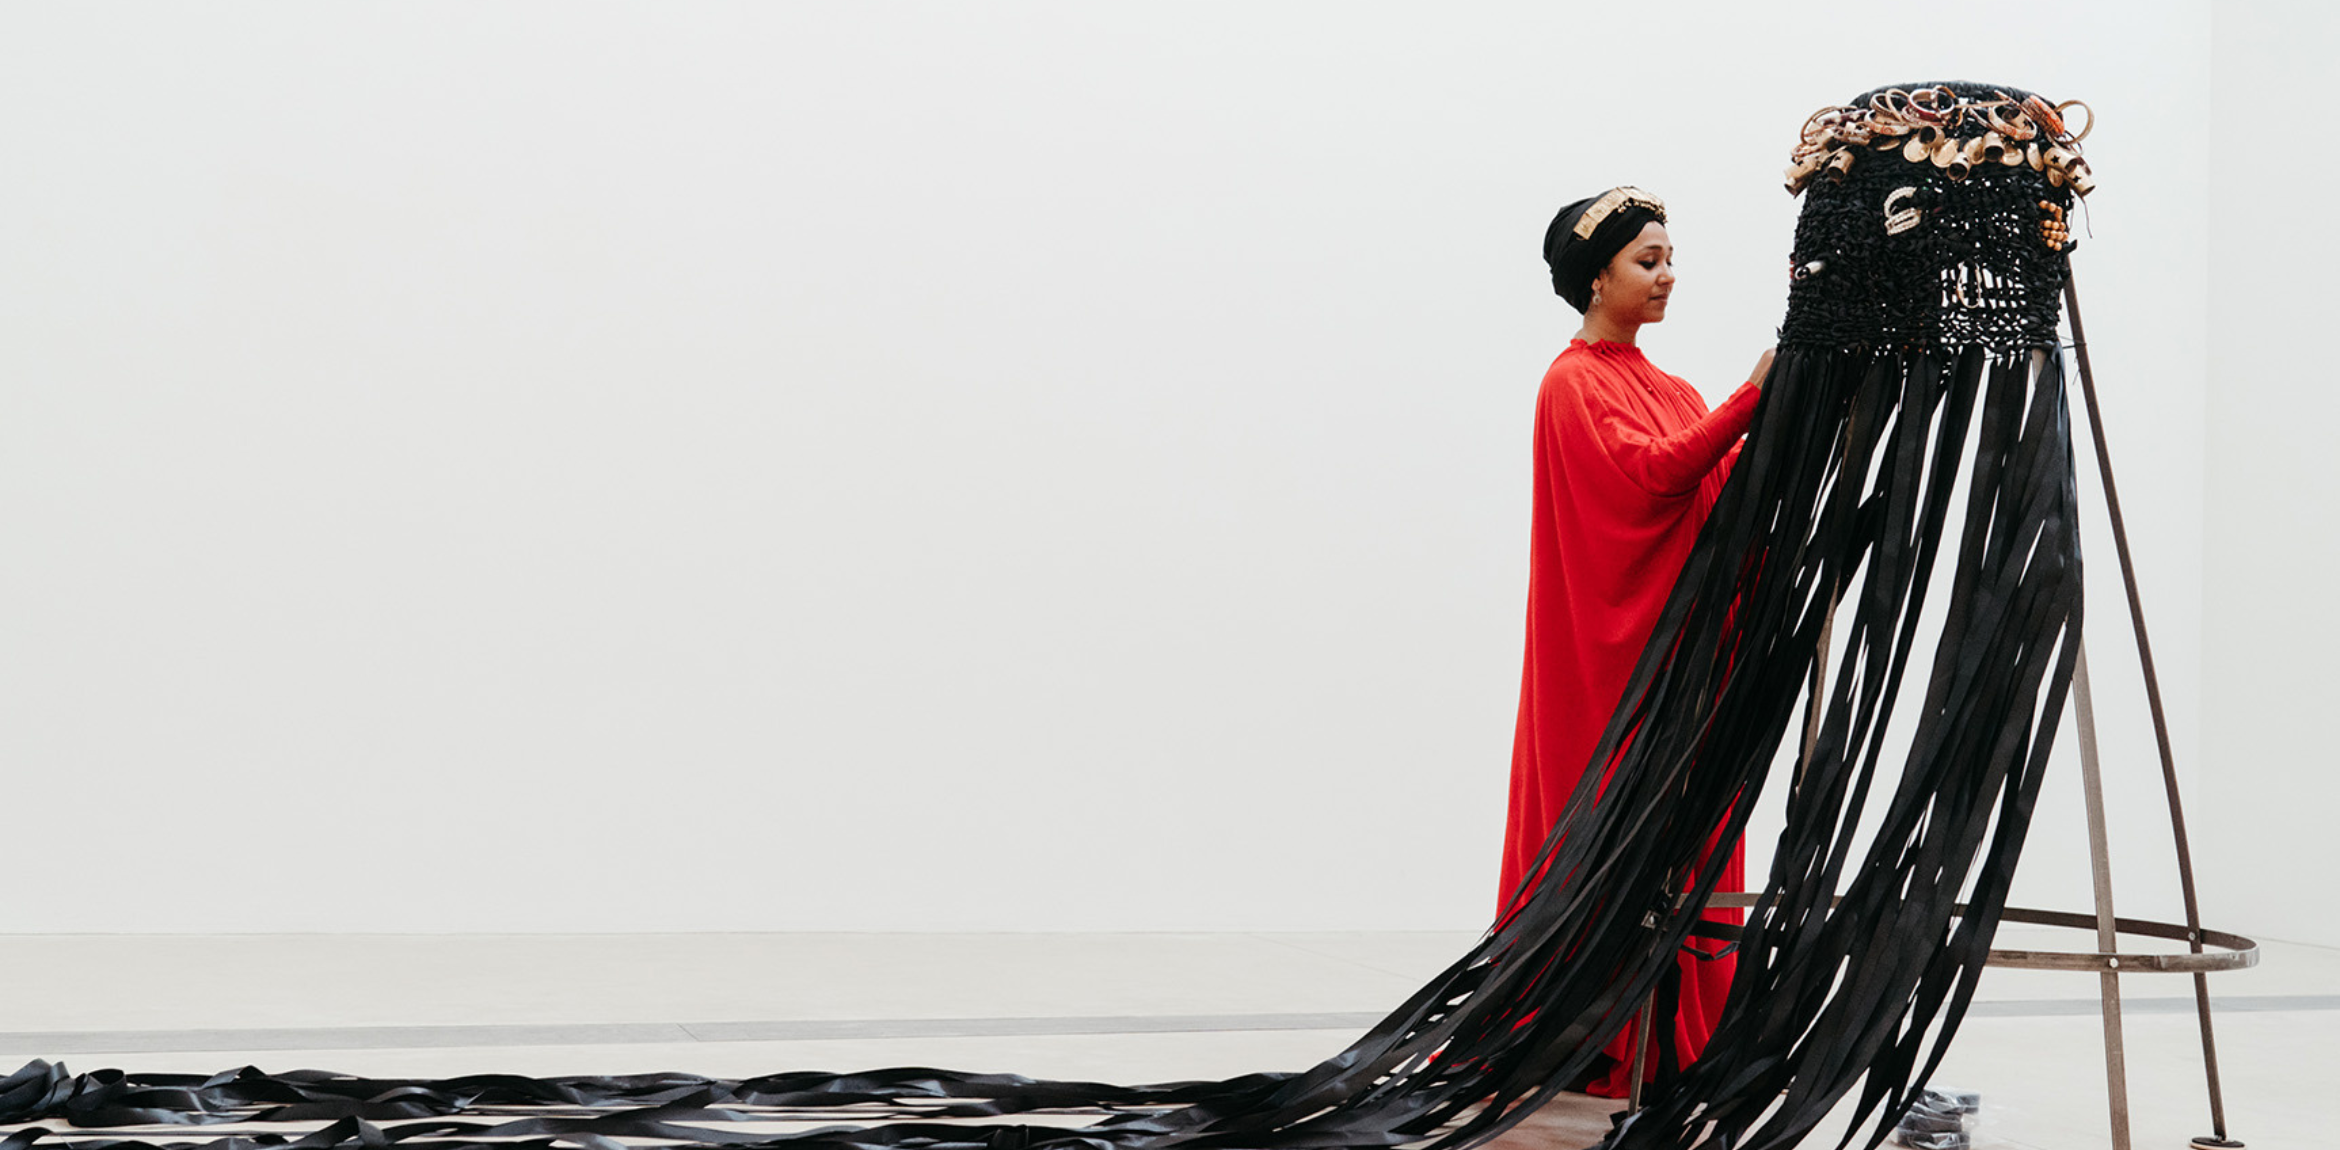 A person dressed in a long, flowing red garment and a black headwrap adorned with a gold headpiece is standing in an art gallery. They are interacting with a large, black, intricately woven sculpture that has long, black ribbon-like extensions flowing down from it and spread across the floor. The sculpture stands on a metal frame, and the background is a plain white wall, creating a minimalistic and modern setting.